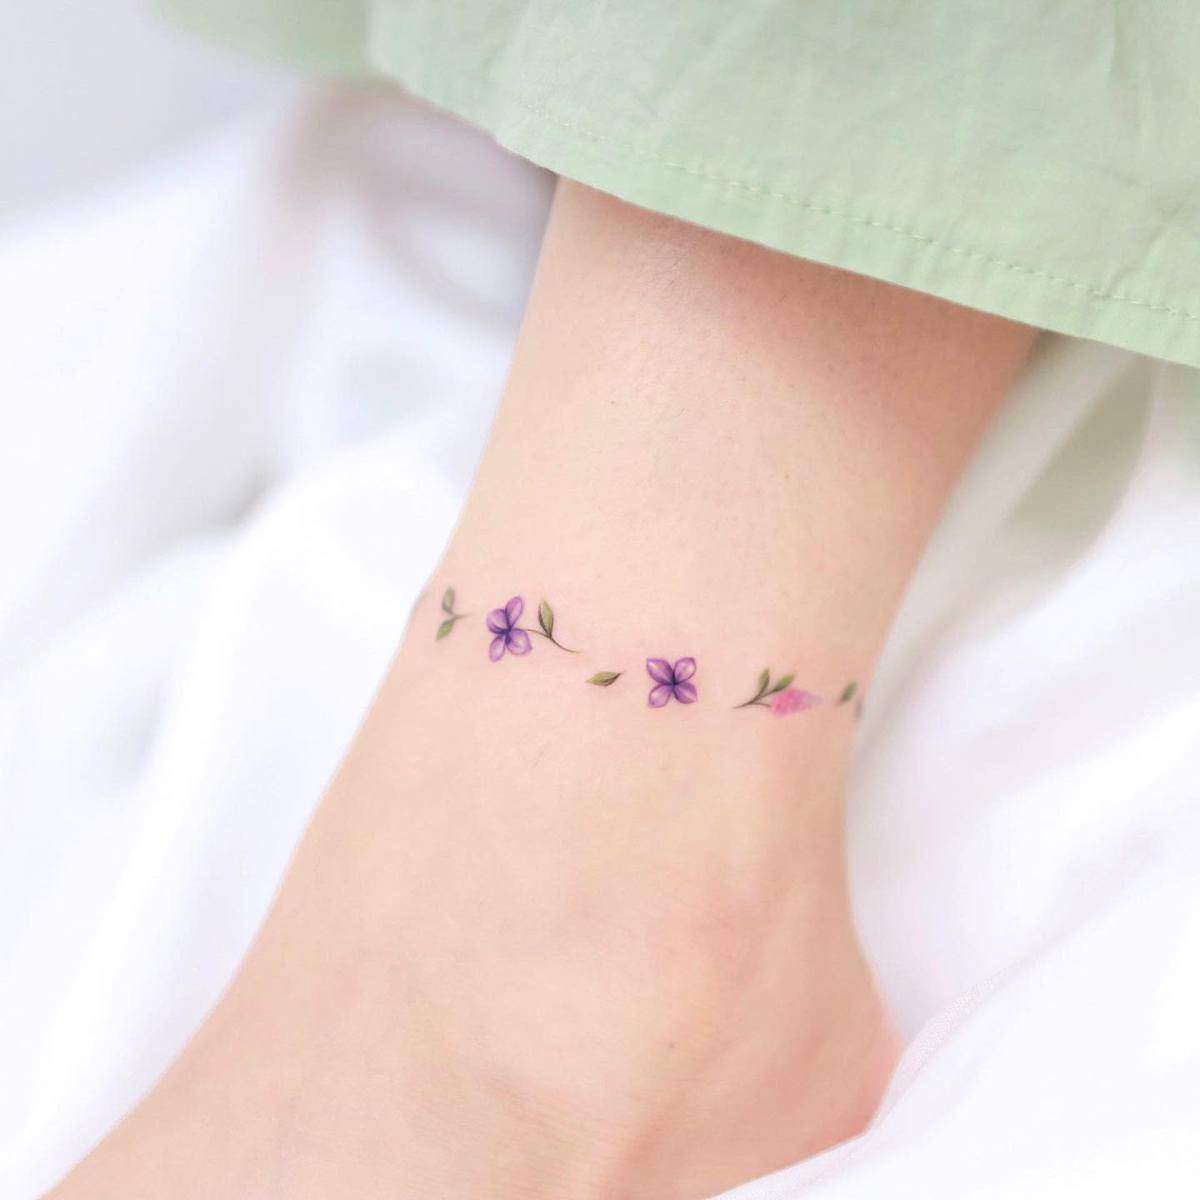 120 Tiny Foot Tattoo Ideas Showing Sometimes Less Is More  Bored Panda